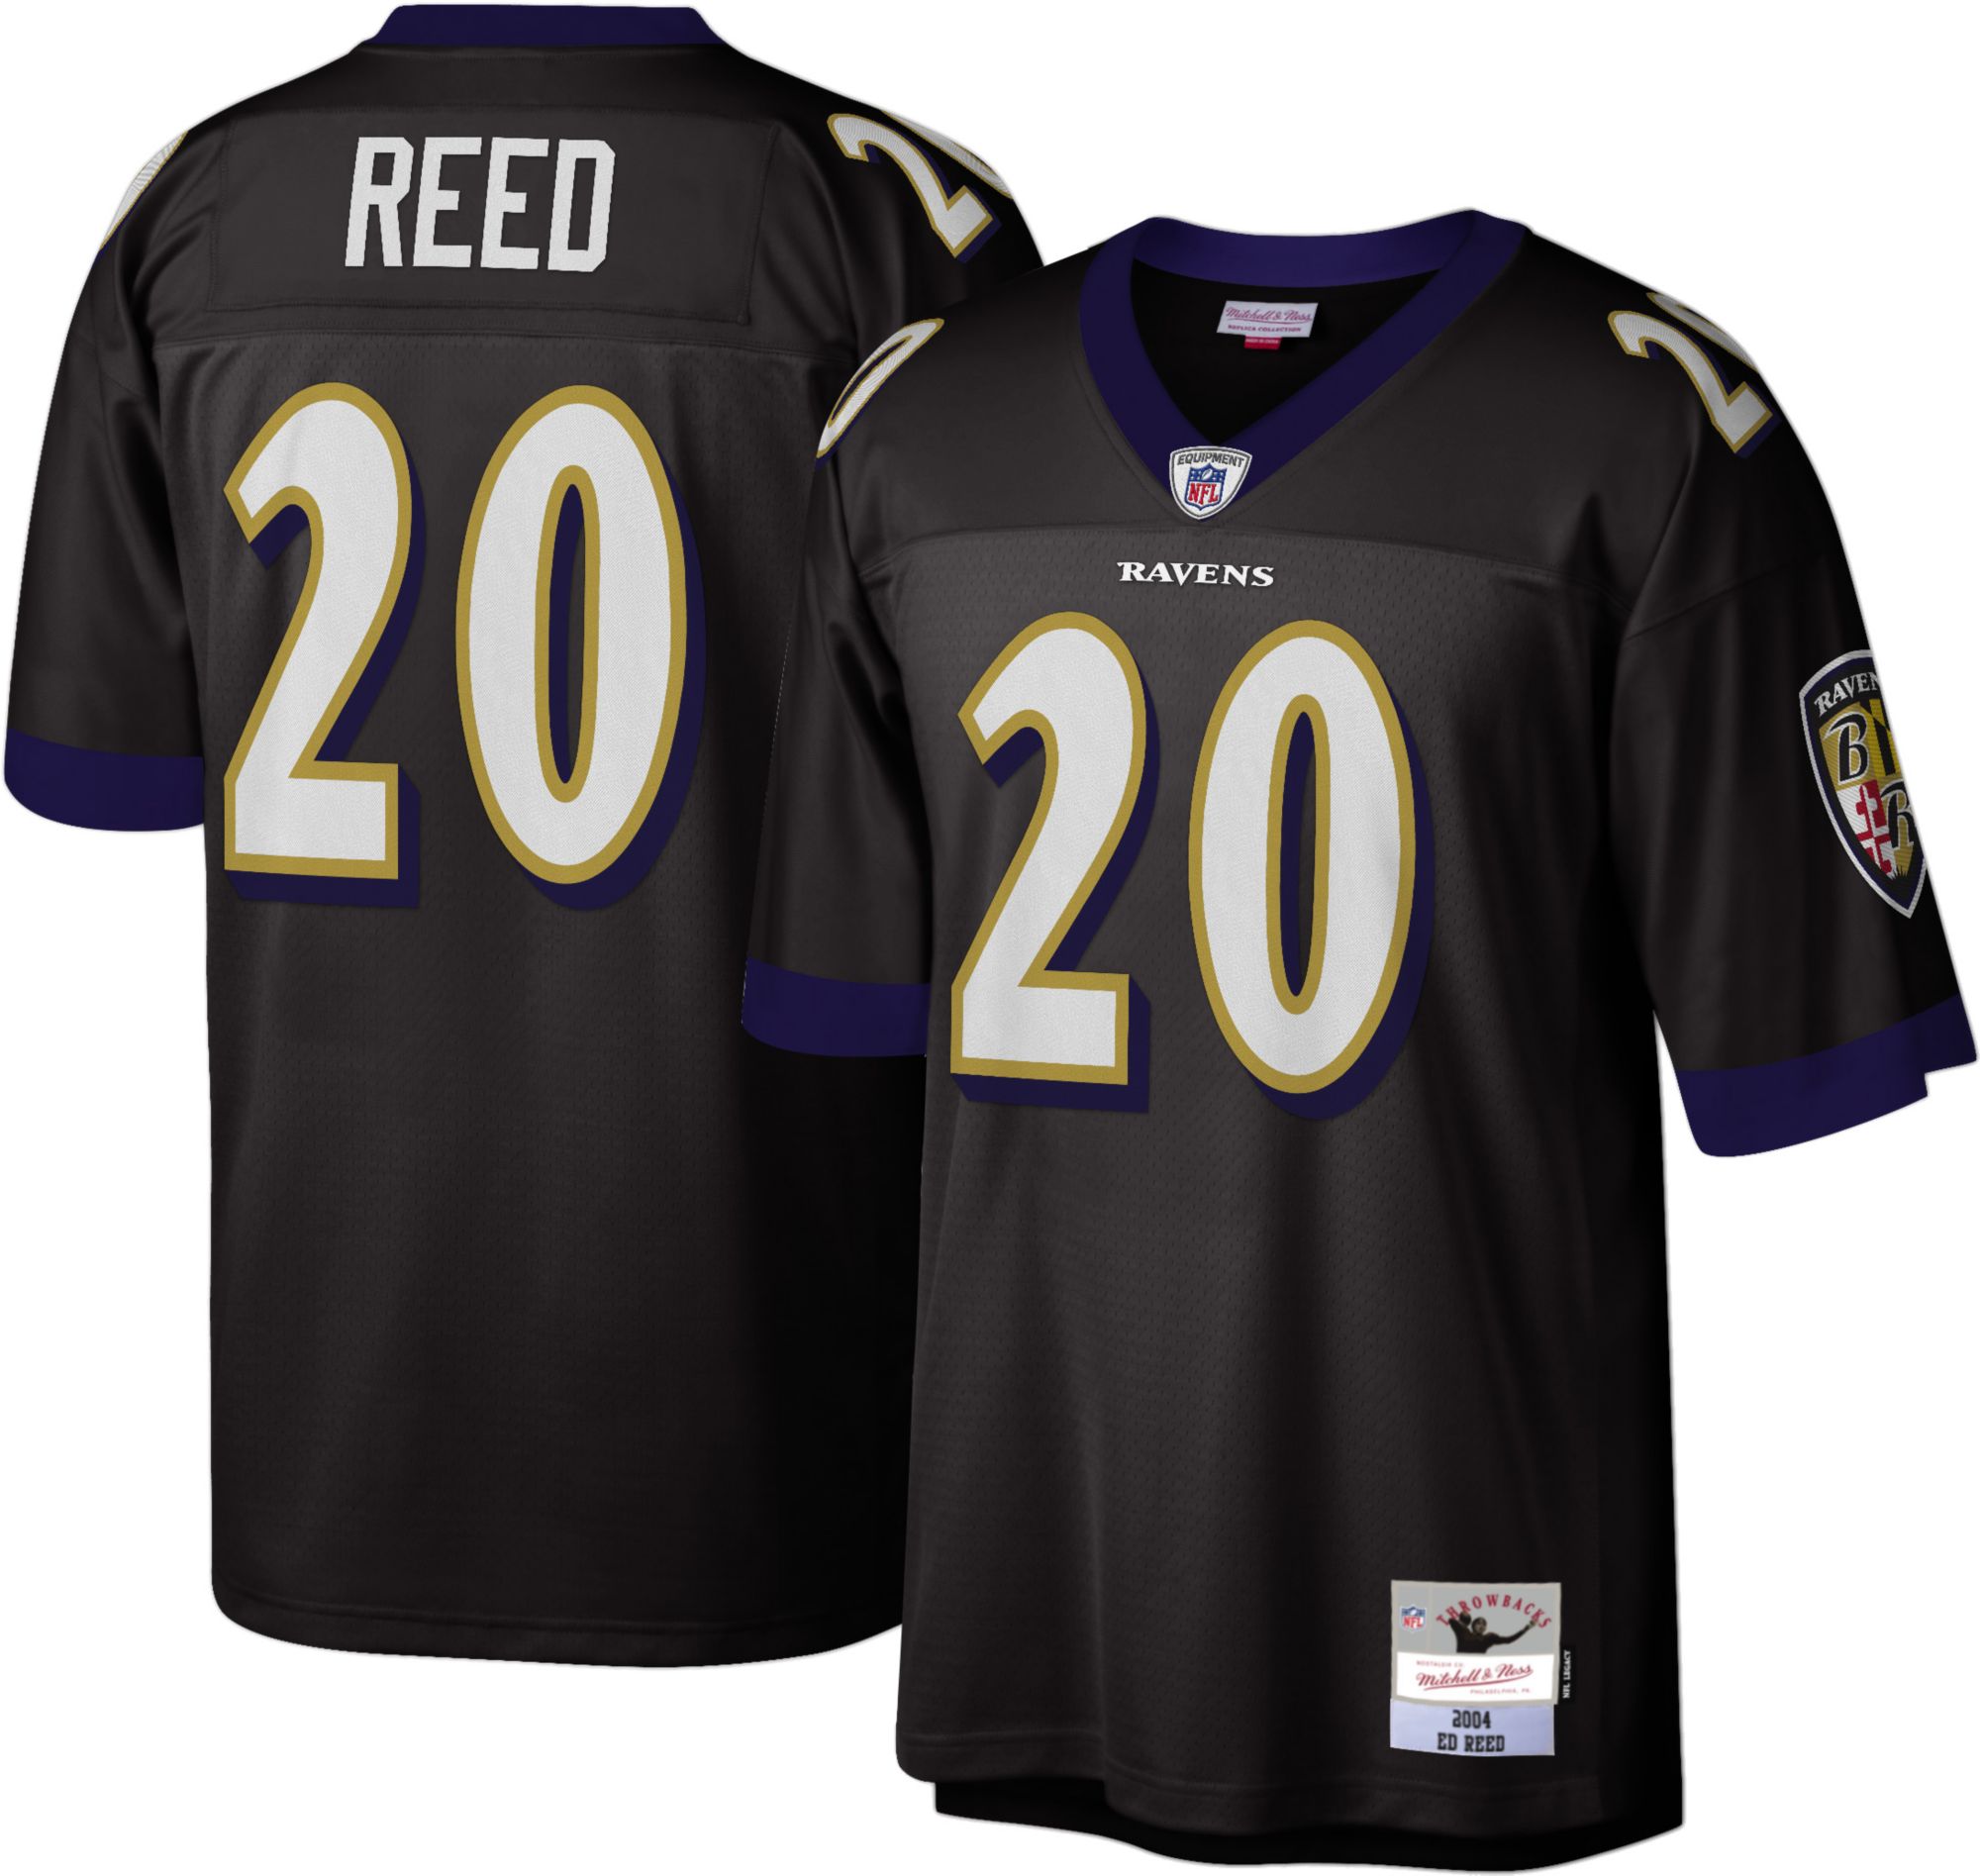 ed reed jersey mitchell and ness